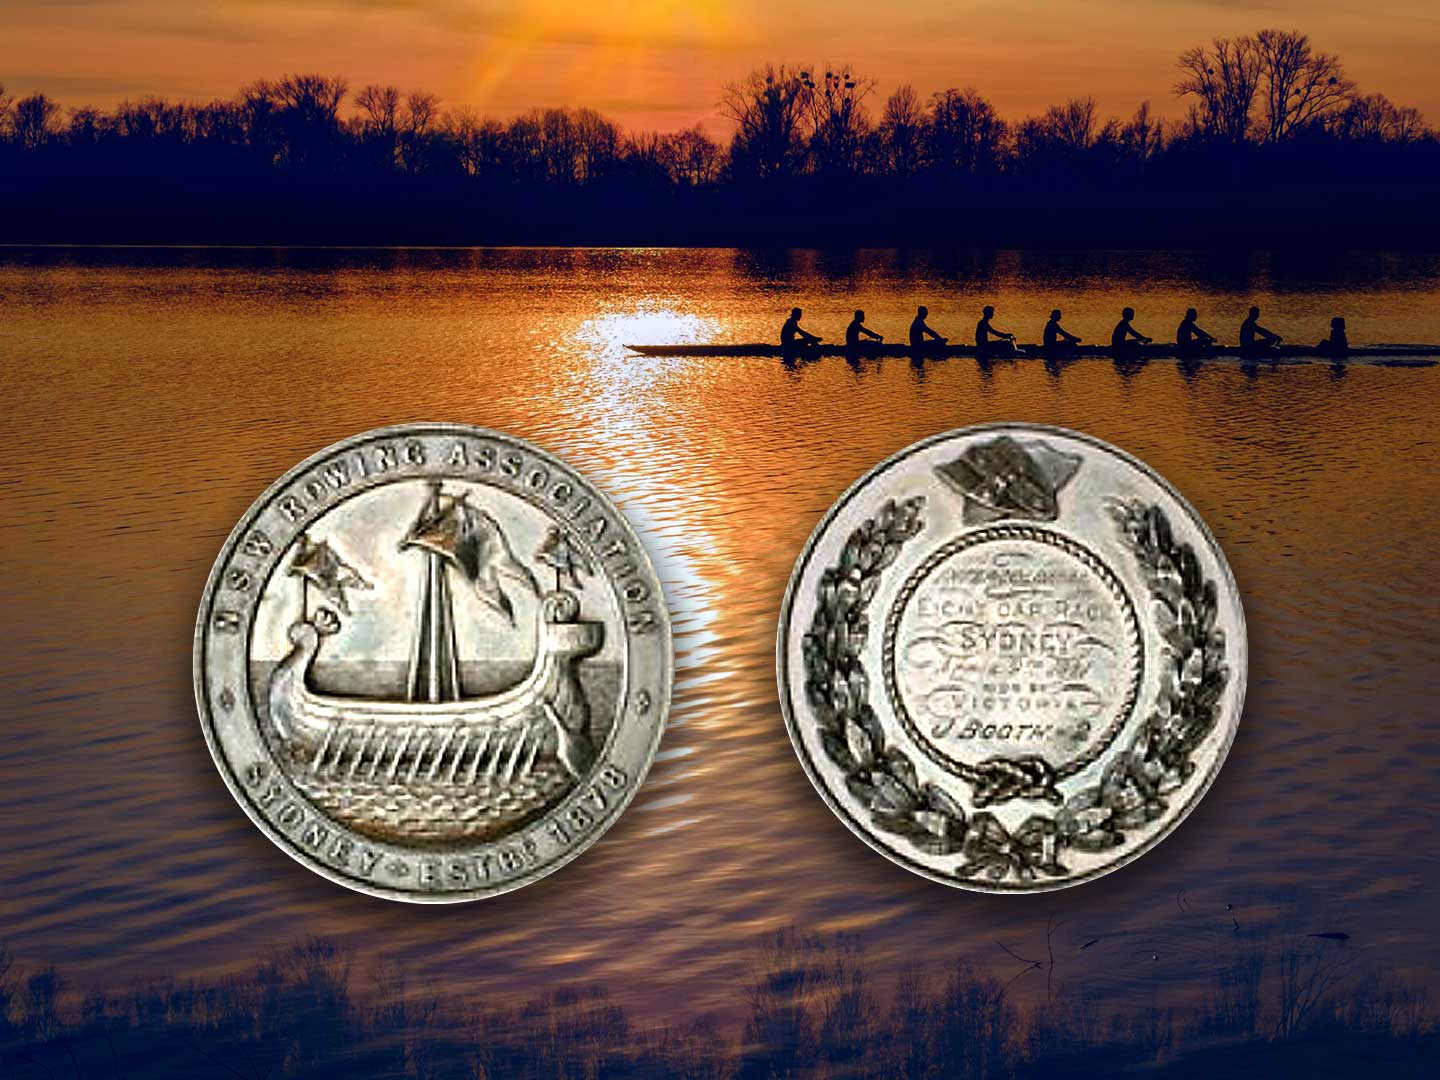 Oarsome Medal   1440 x 1080